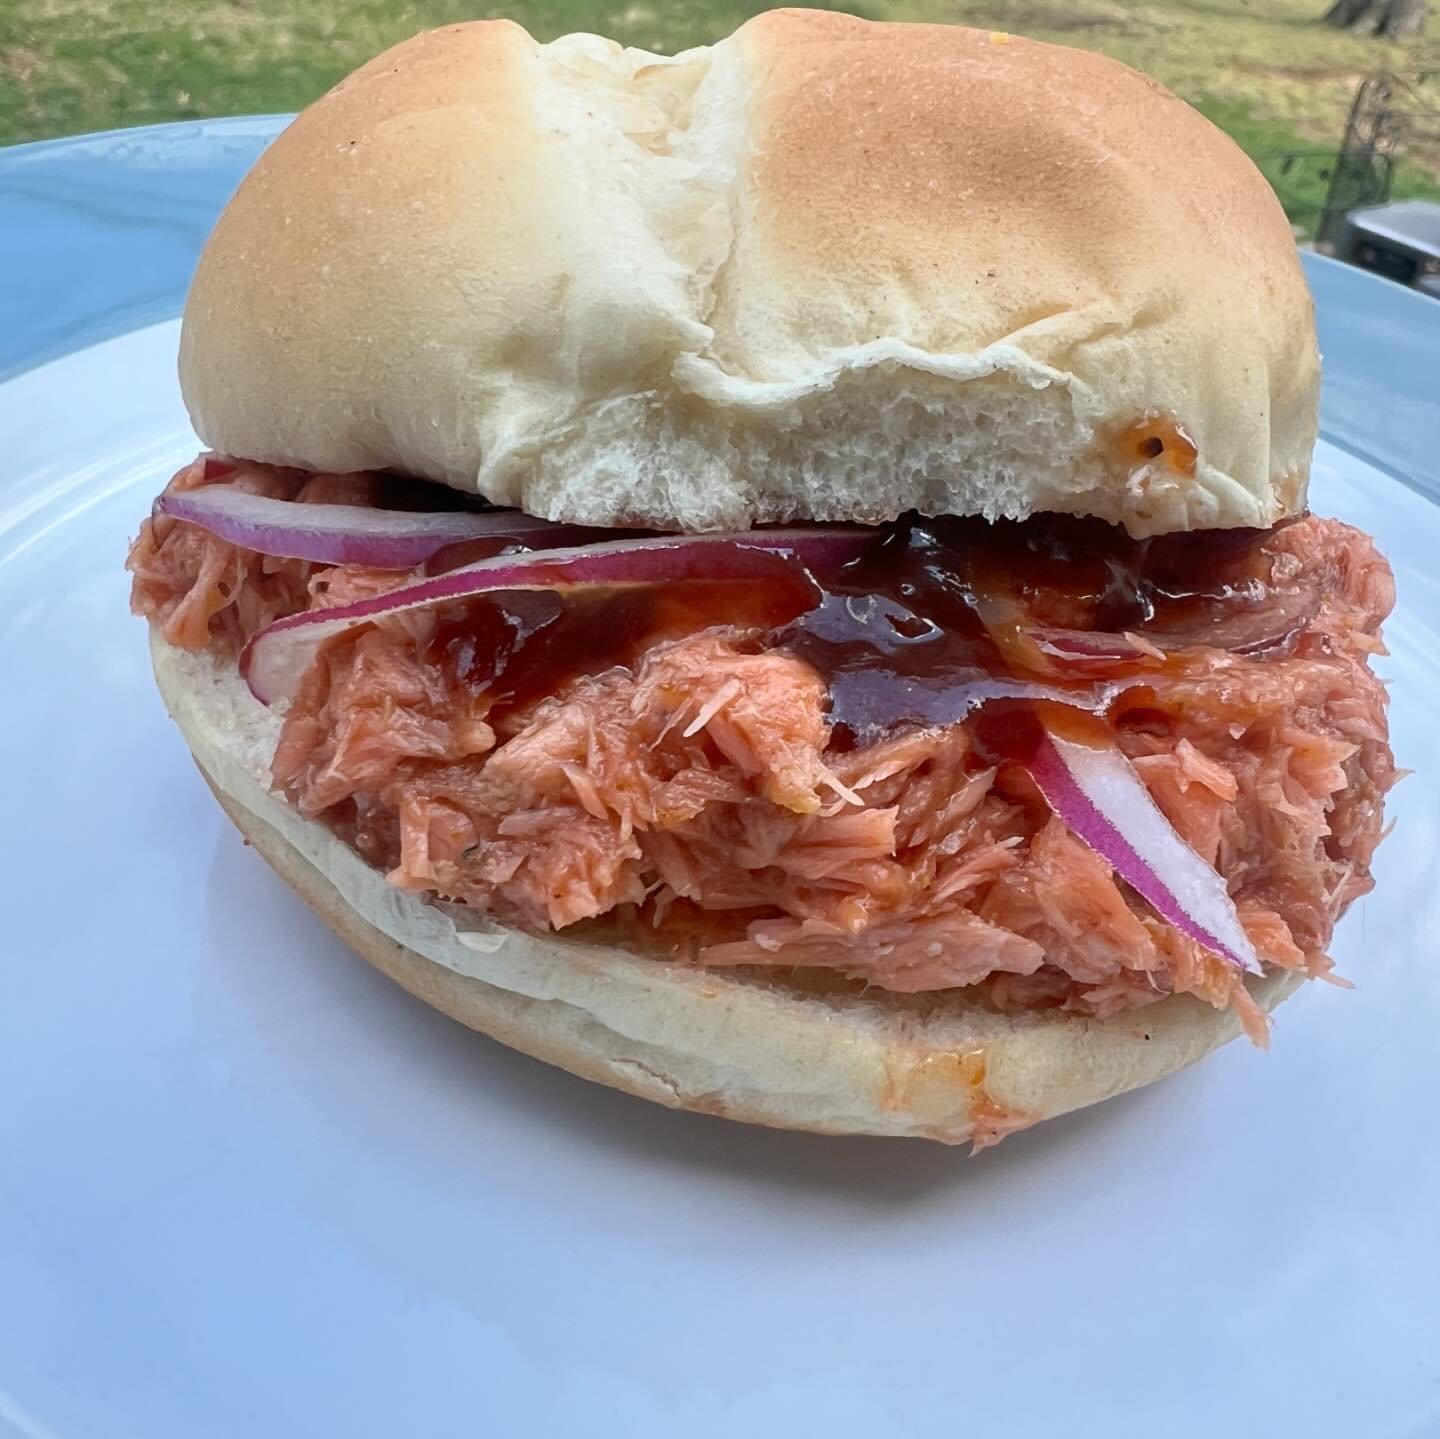 Special menu item for tomorrow&hellip;

Chopped BBQ Salmon! 

Salmon, seasoned&hellip;smoked &amp; chopped. Served up on a brioche bun, with bbq sauce and sliced red onion (optional). 

Something different. Come thru and give it a try tomorrow! Check